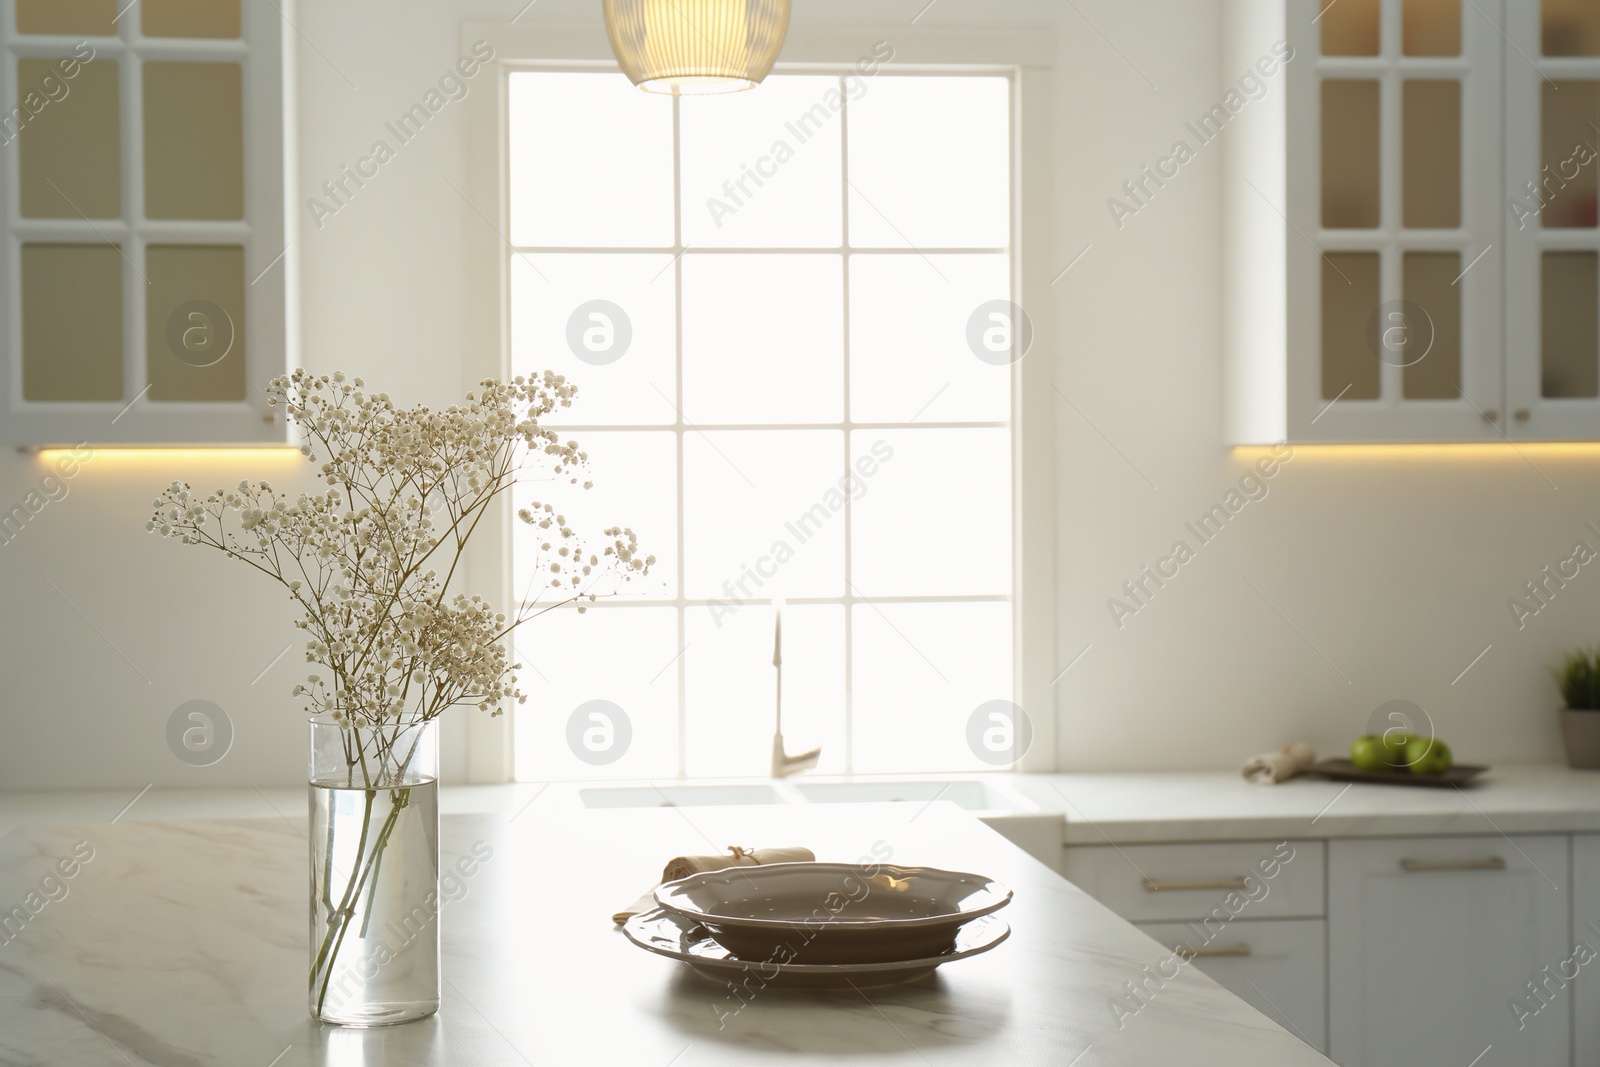 Photo of Beautiful plates and bouquet on table in kitchen